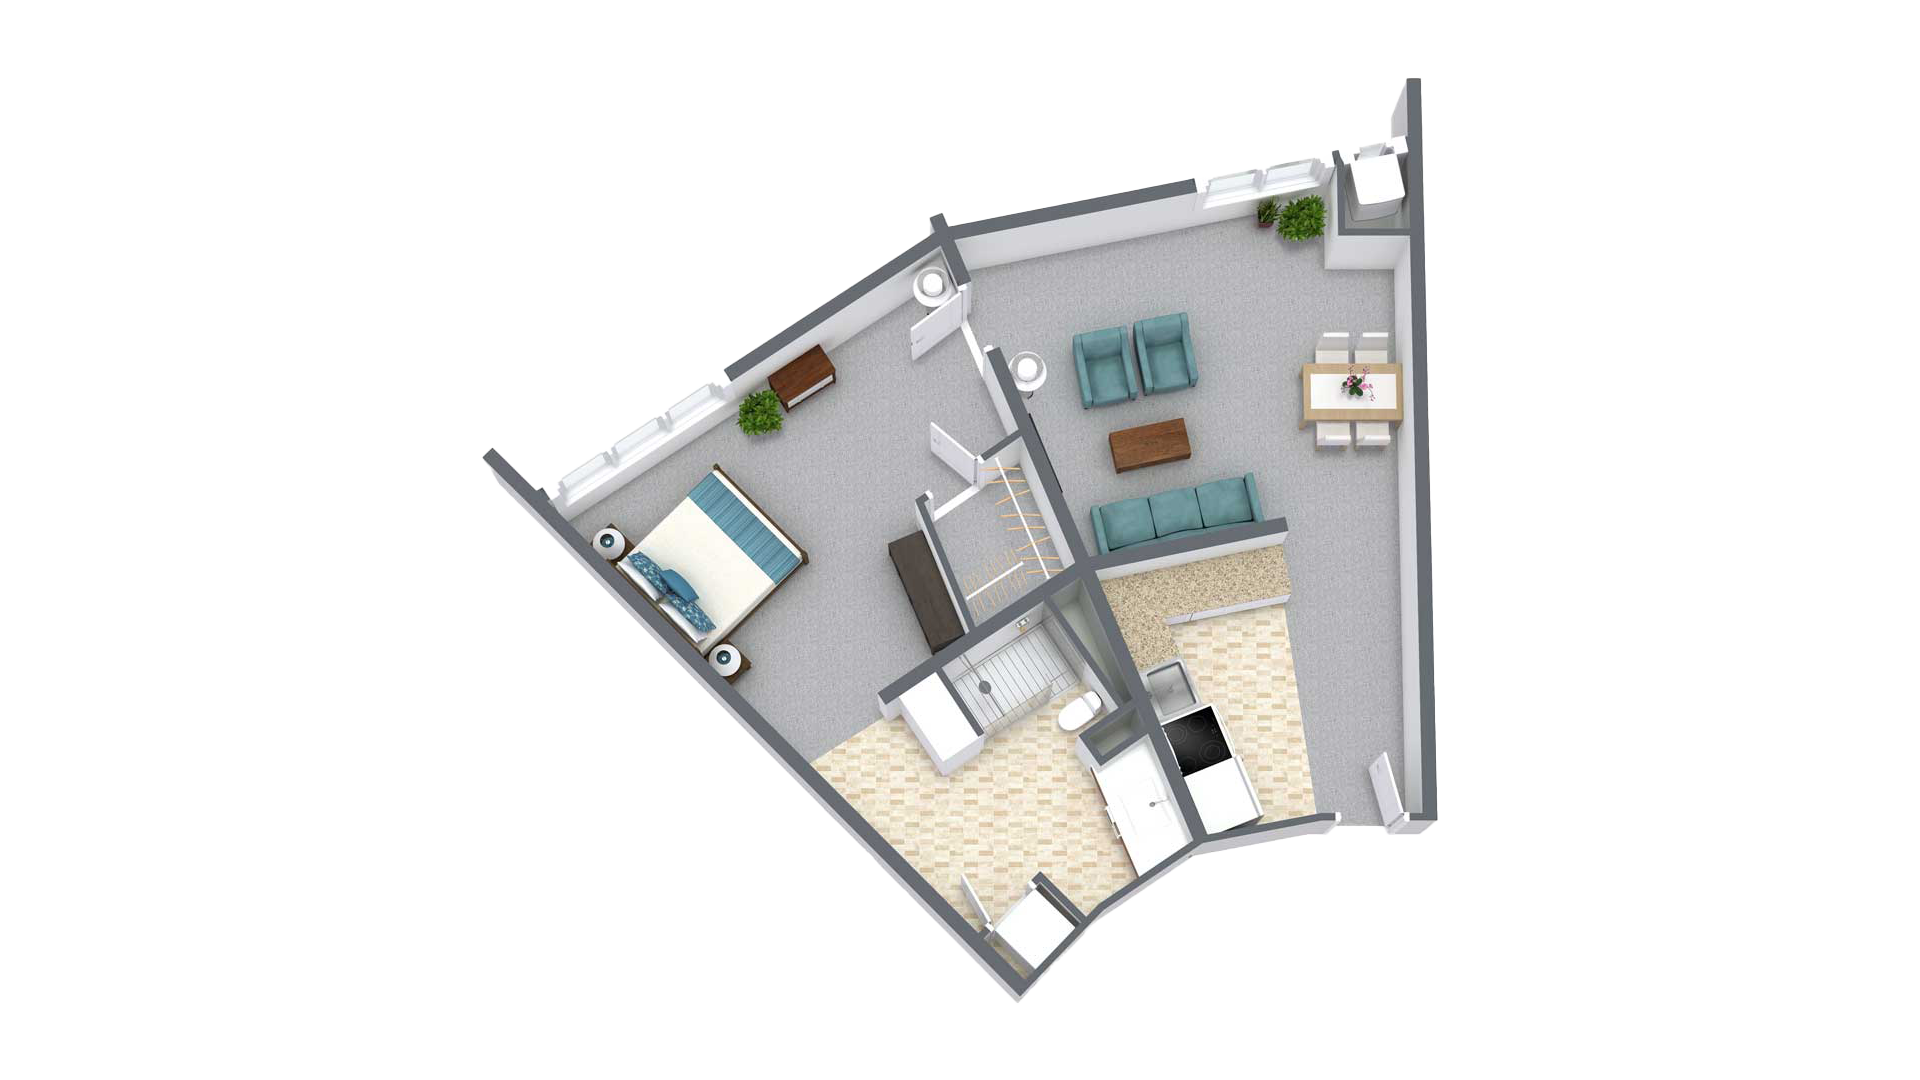 Copeland Tower Living senior apartment autocad rendering showing the complete layout of the kitchen, livingroom with windows, bedroom with windows, walk-in closet, and bathroom